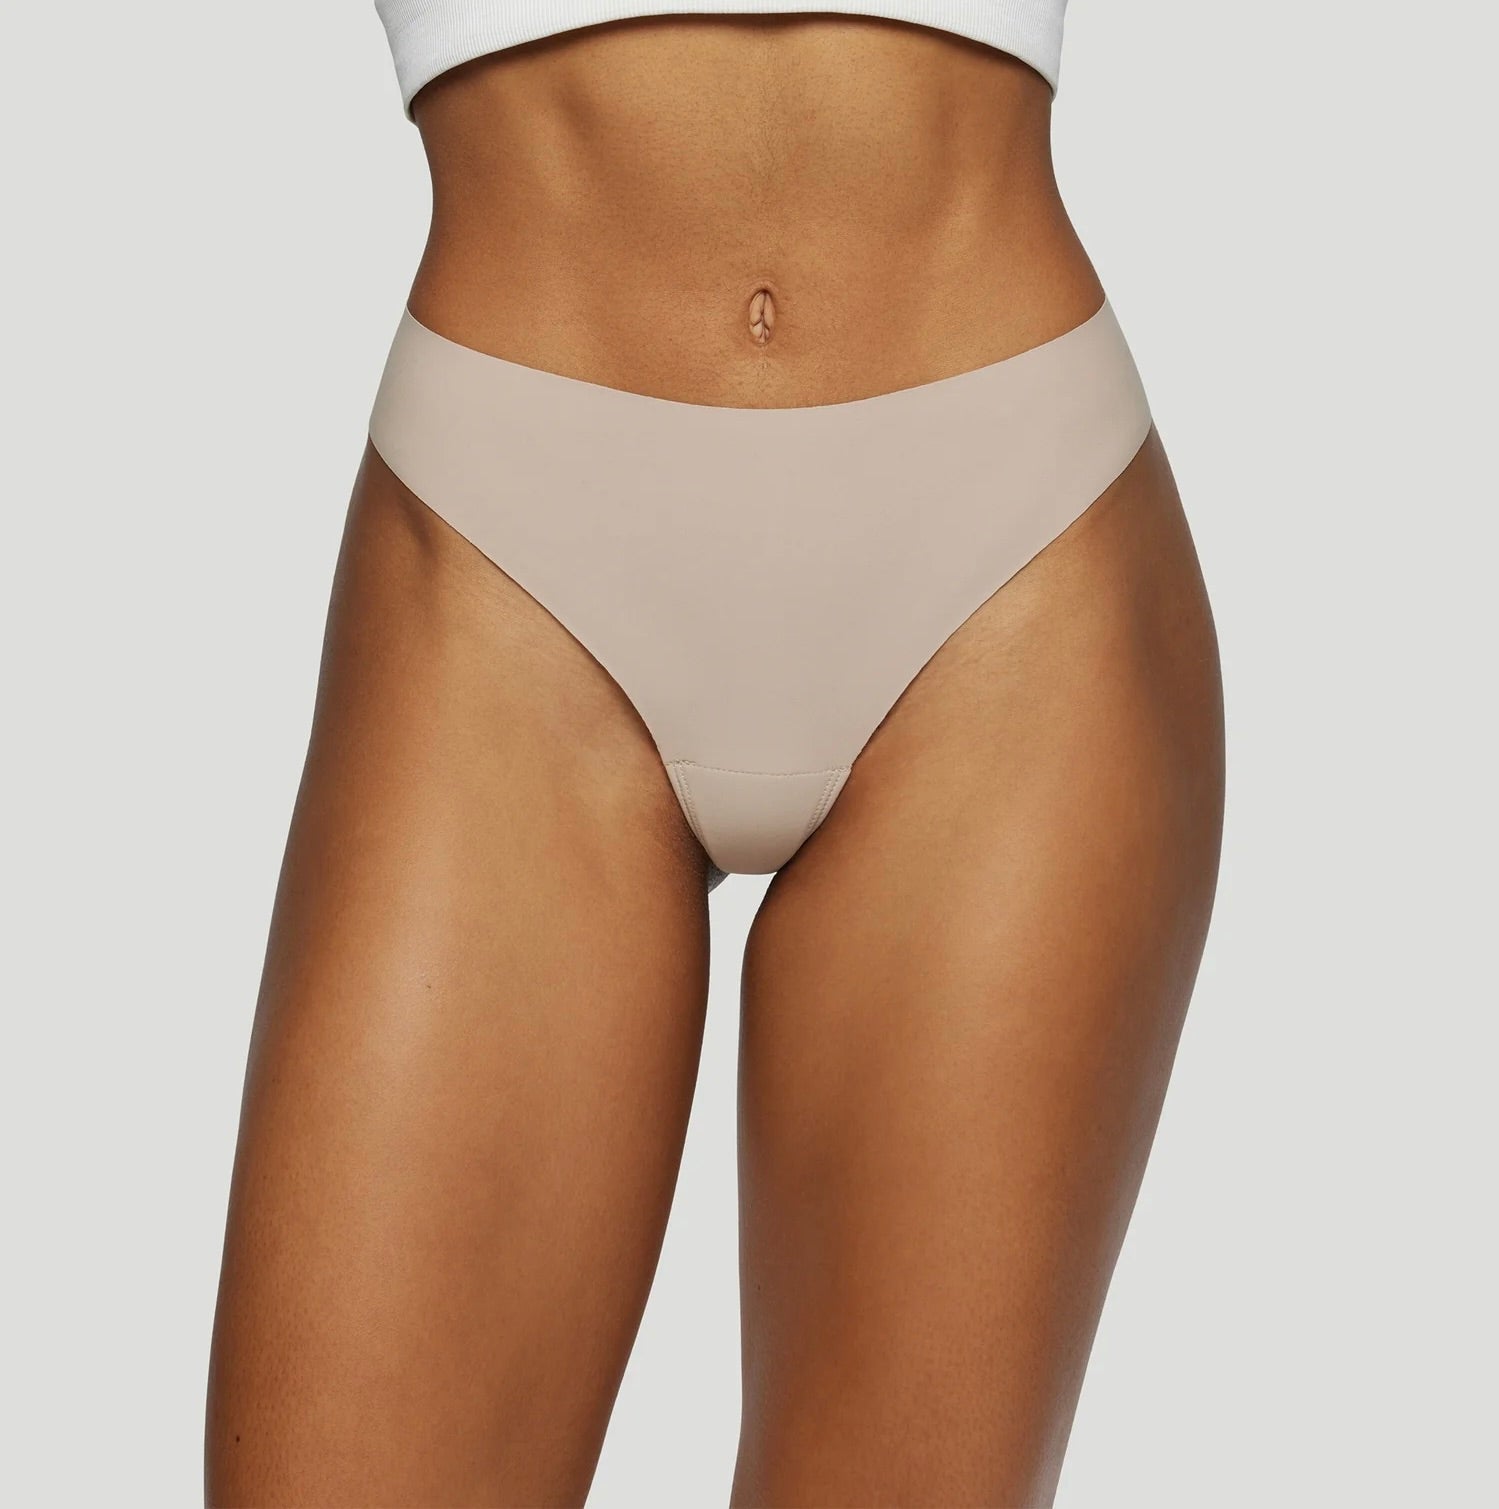 Camel toe panties for sale: This is a thing now